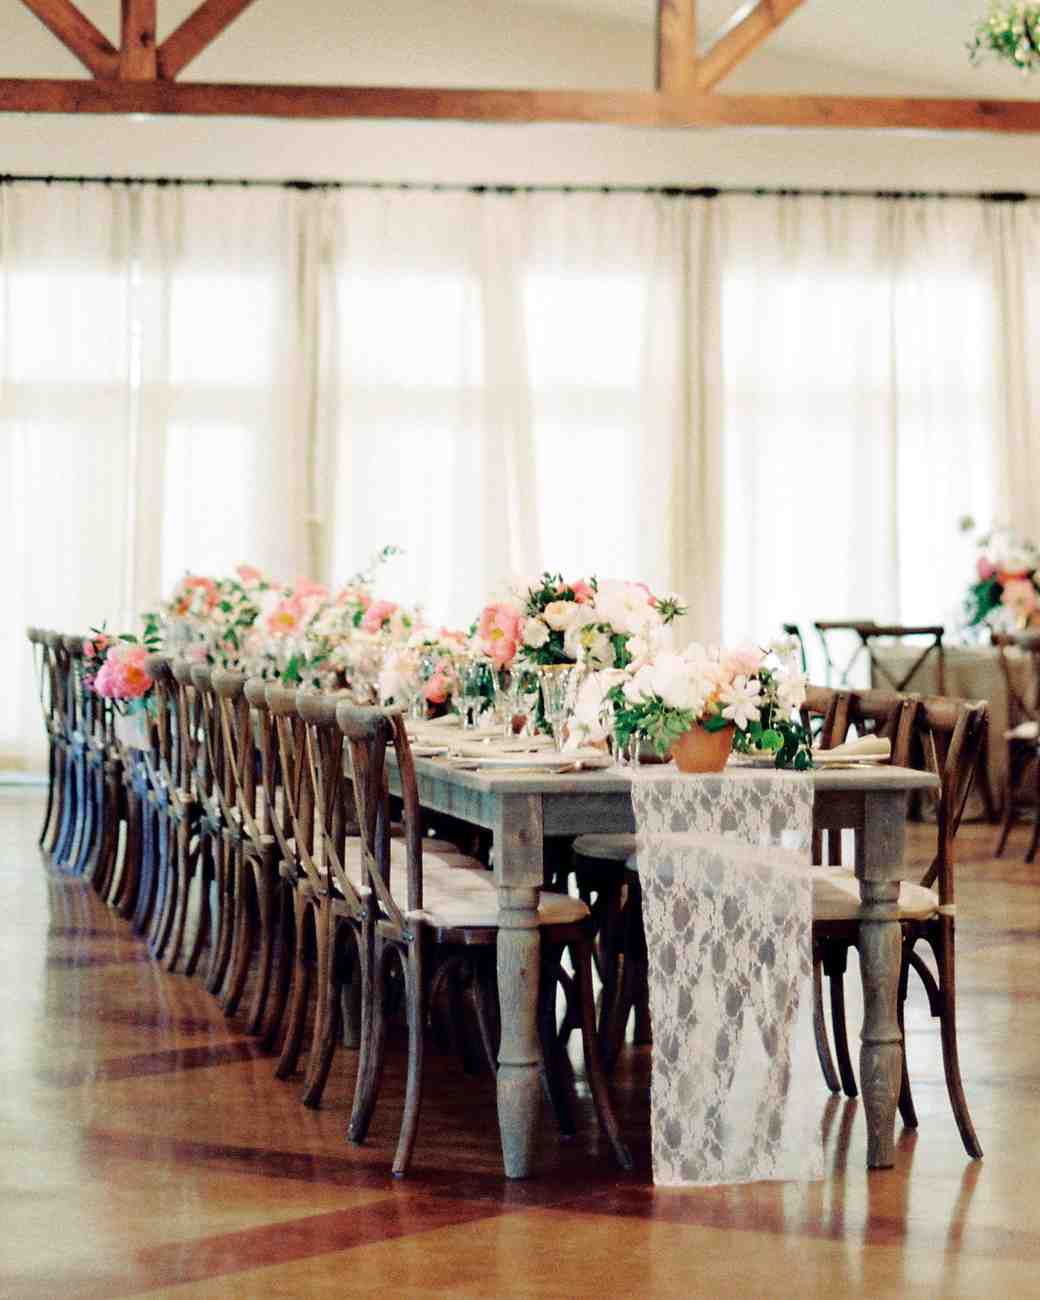 Lace and peachy pastels softened up the rustic weathered tables